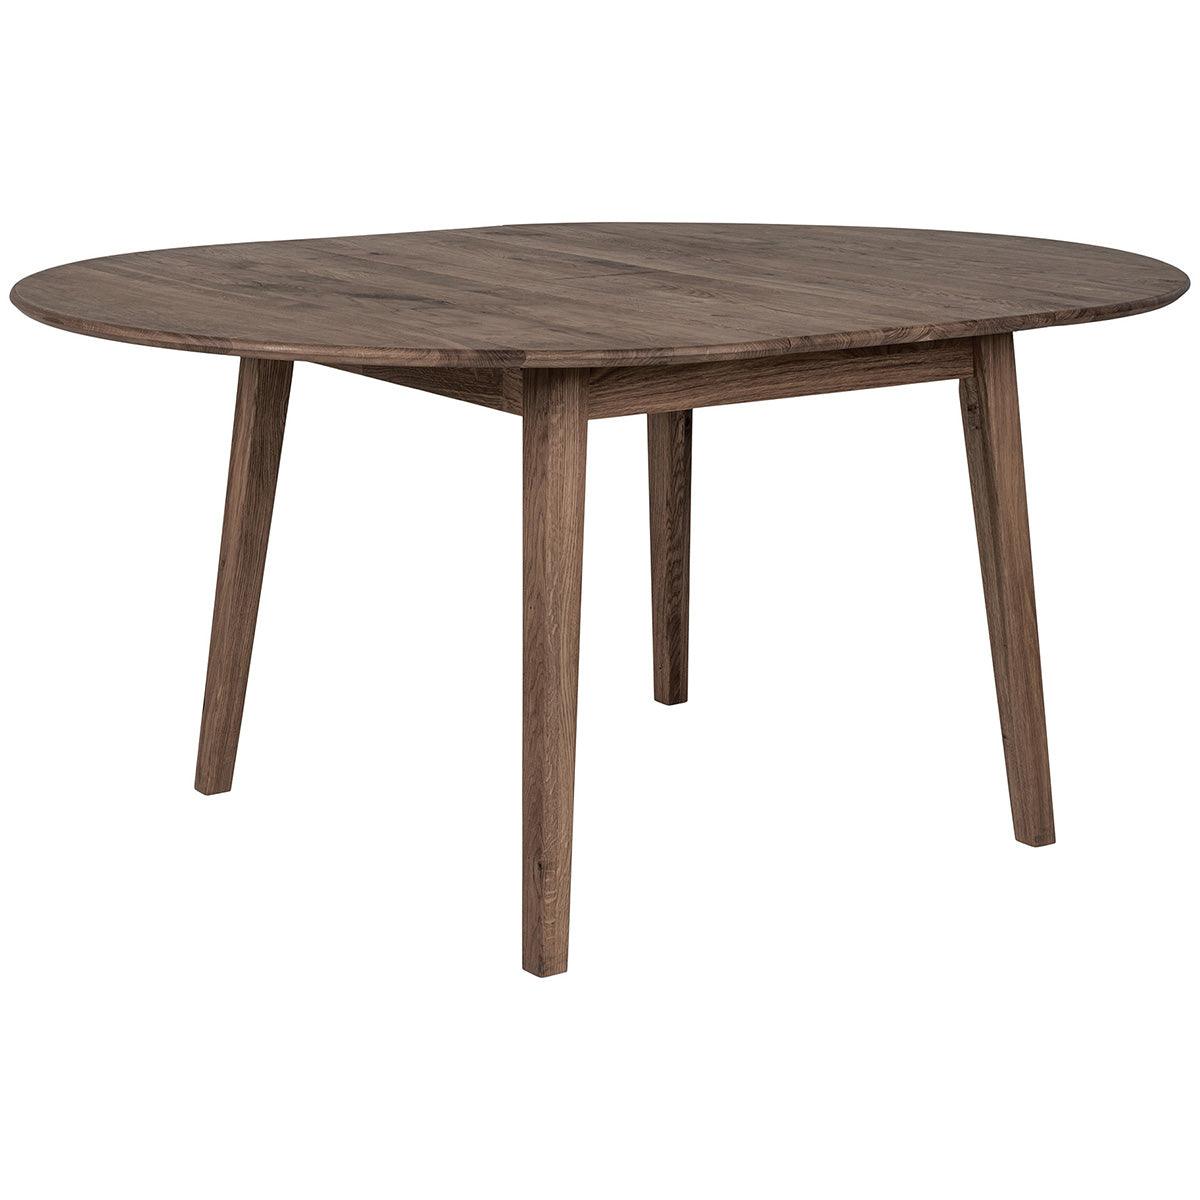 Metz Oiled Oak Extendable Dining Table - WOO .Design